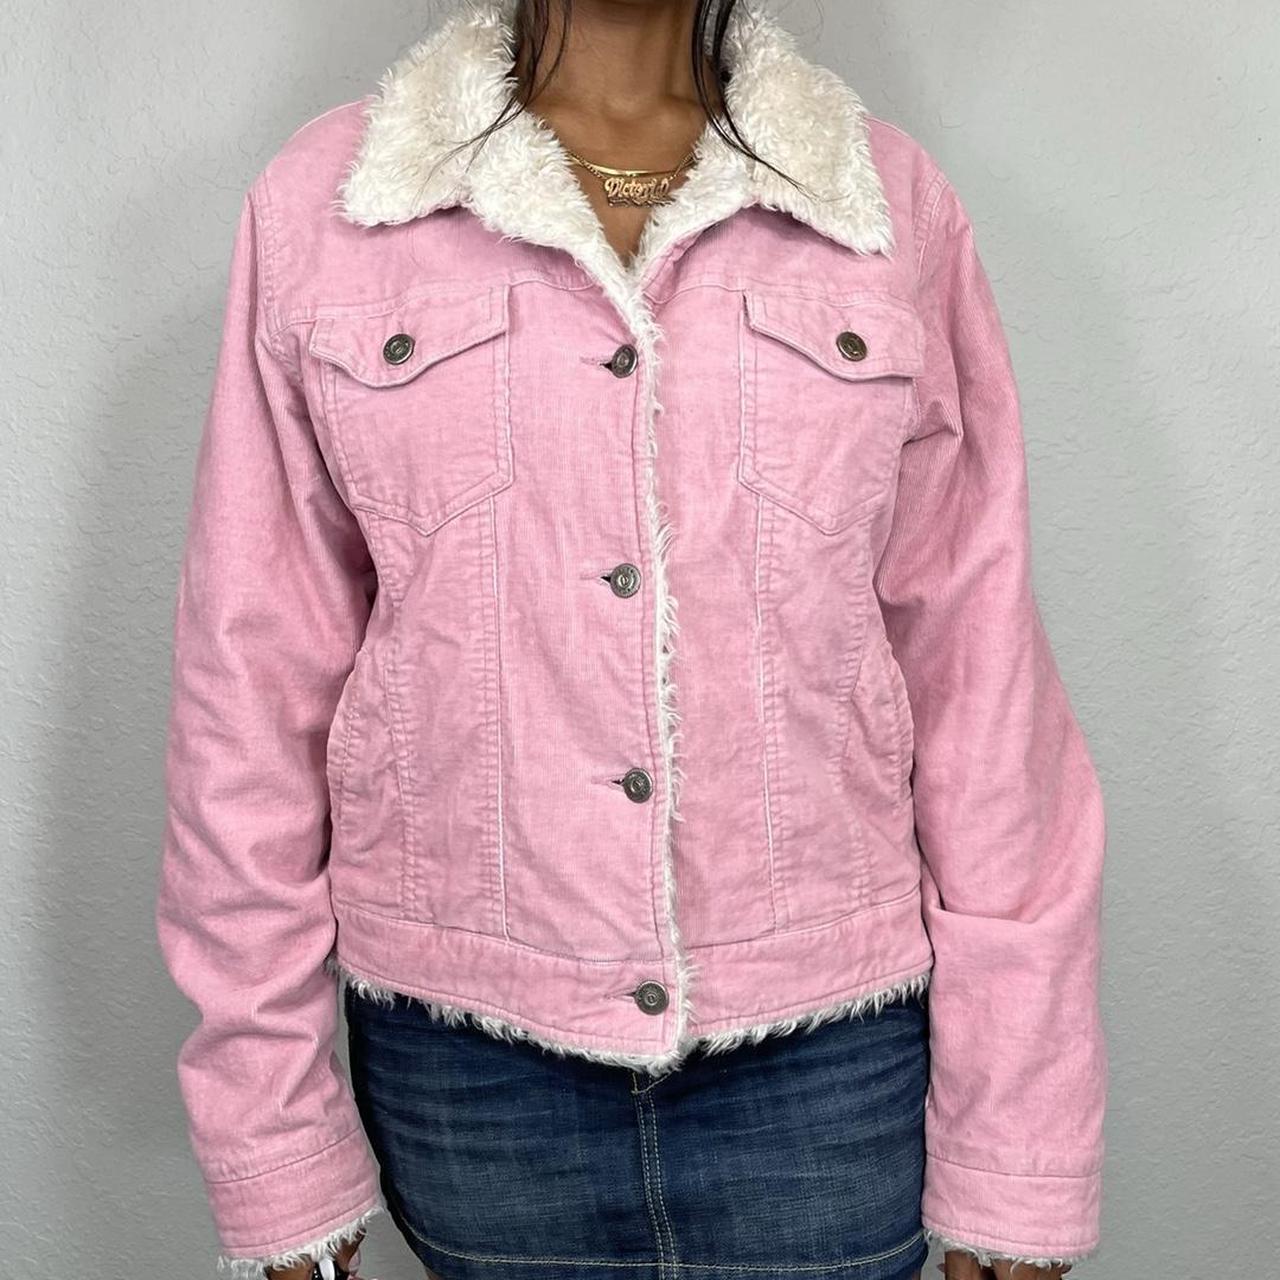 Women's Pink and Cream Jacket (2)